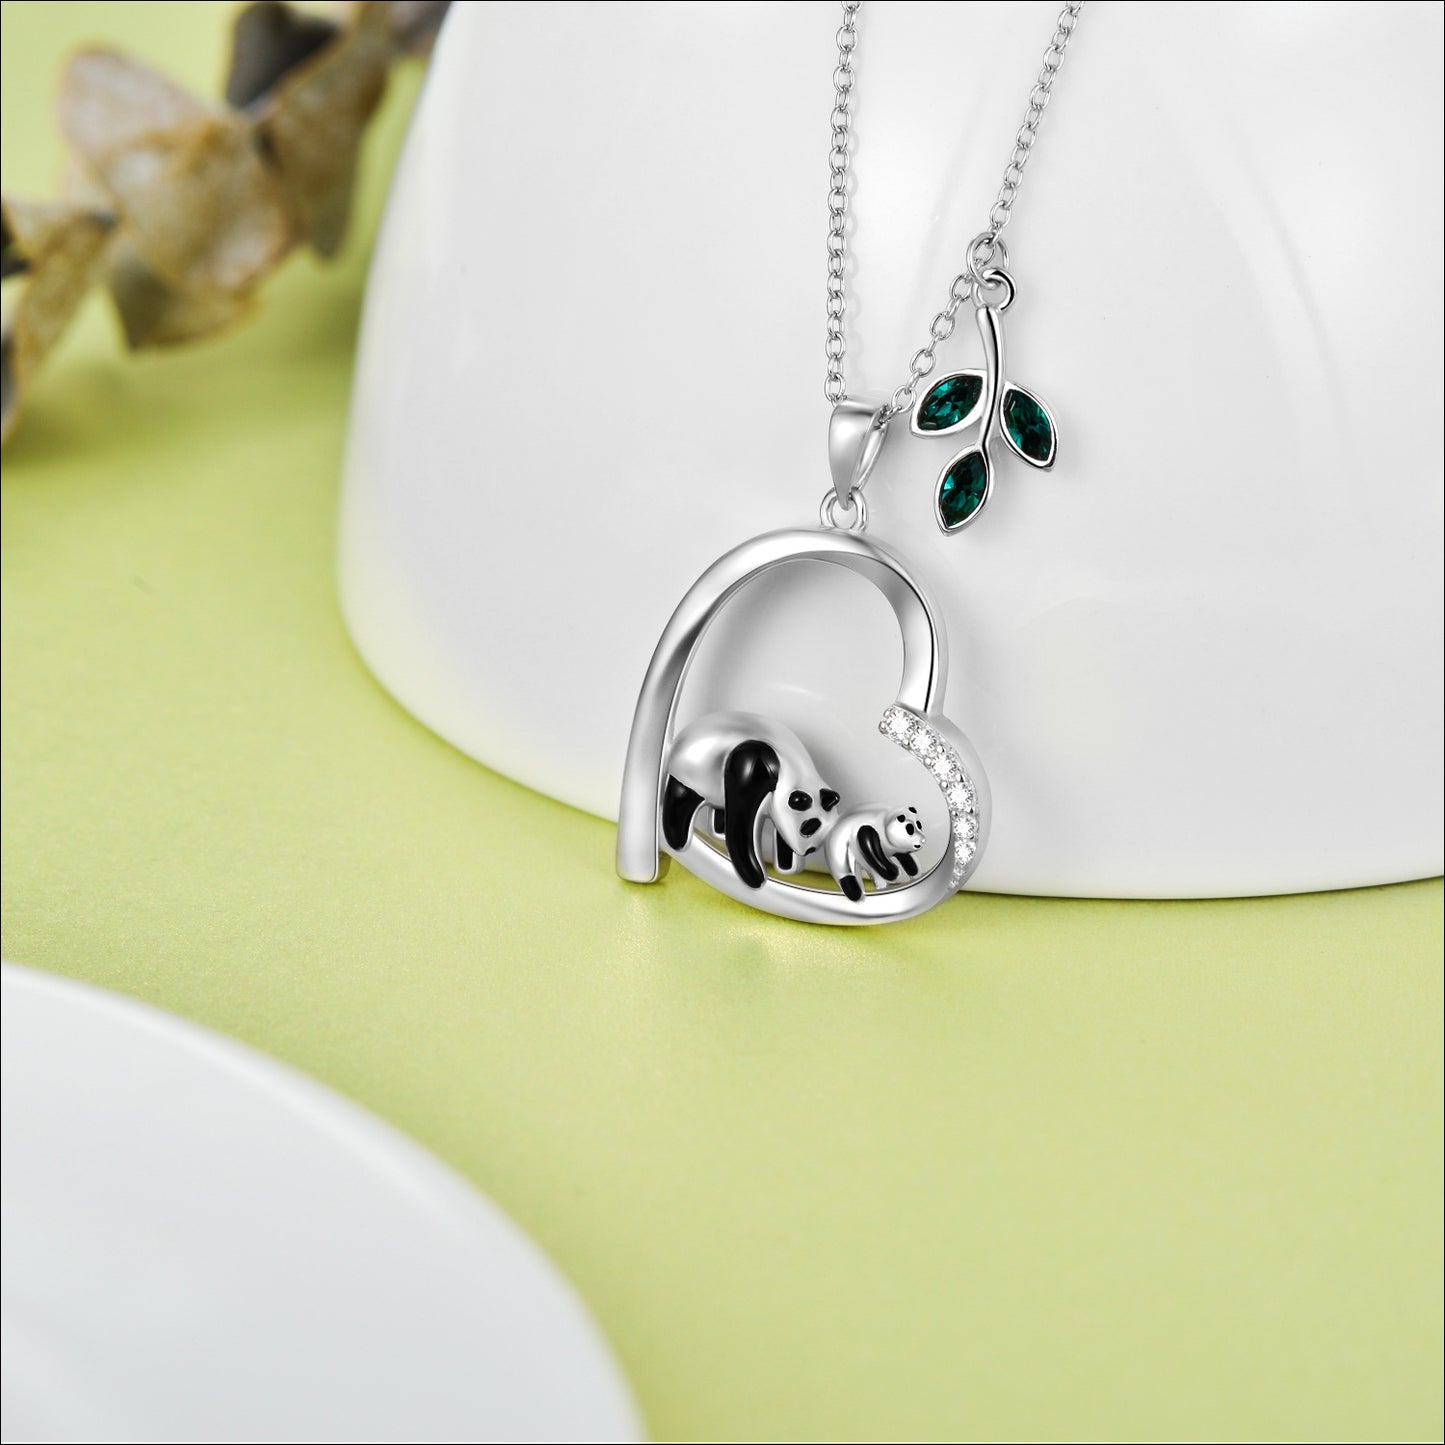 Panda Daughter Mother Necklace with Sterling Silver Heart Pendant Embellished Crystals